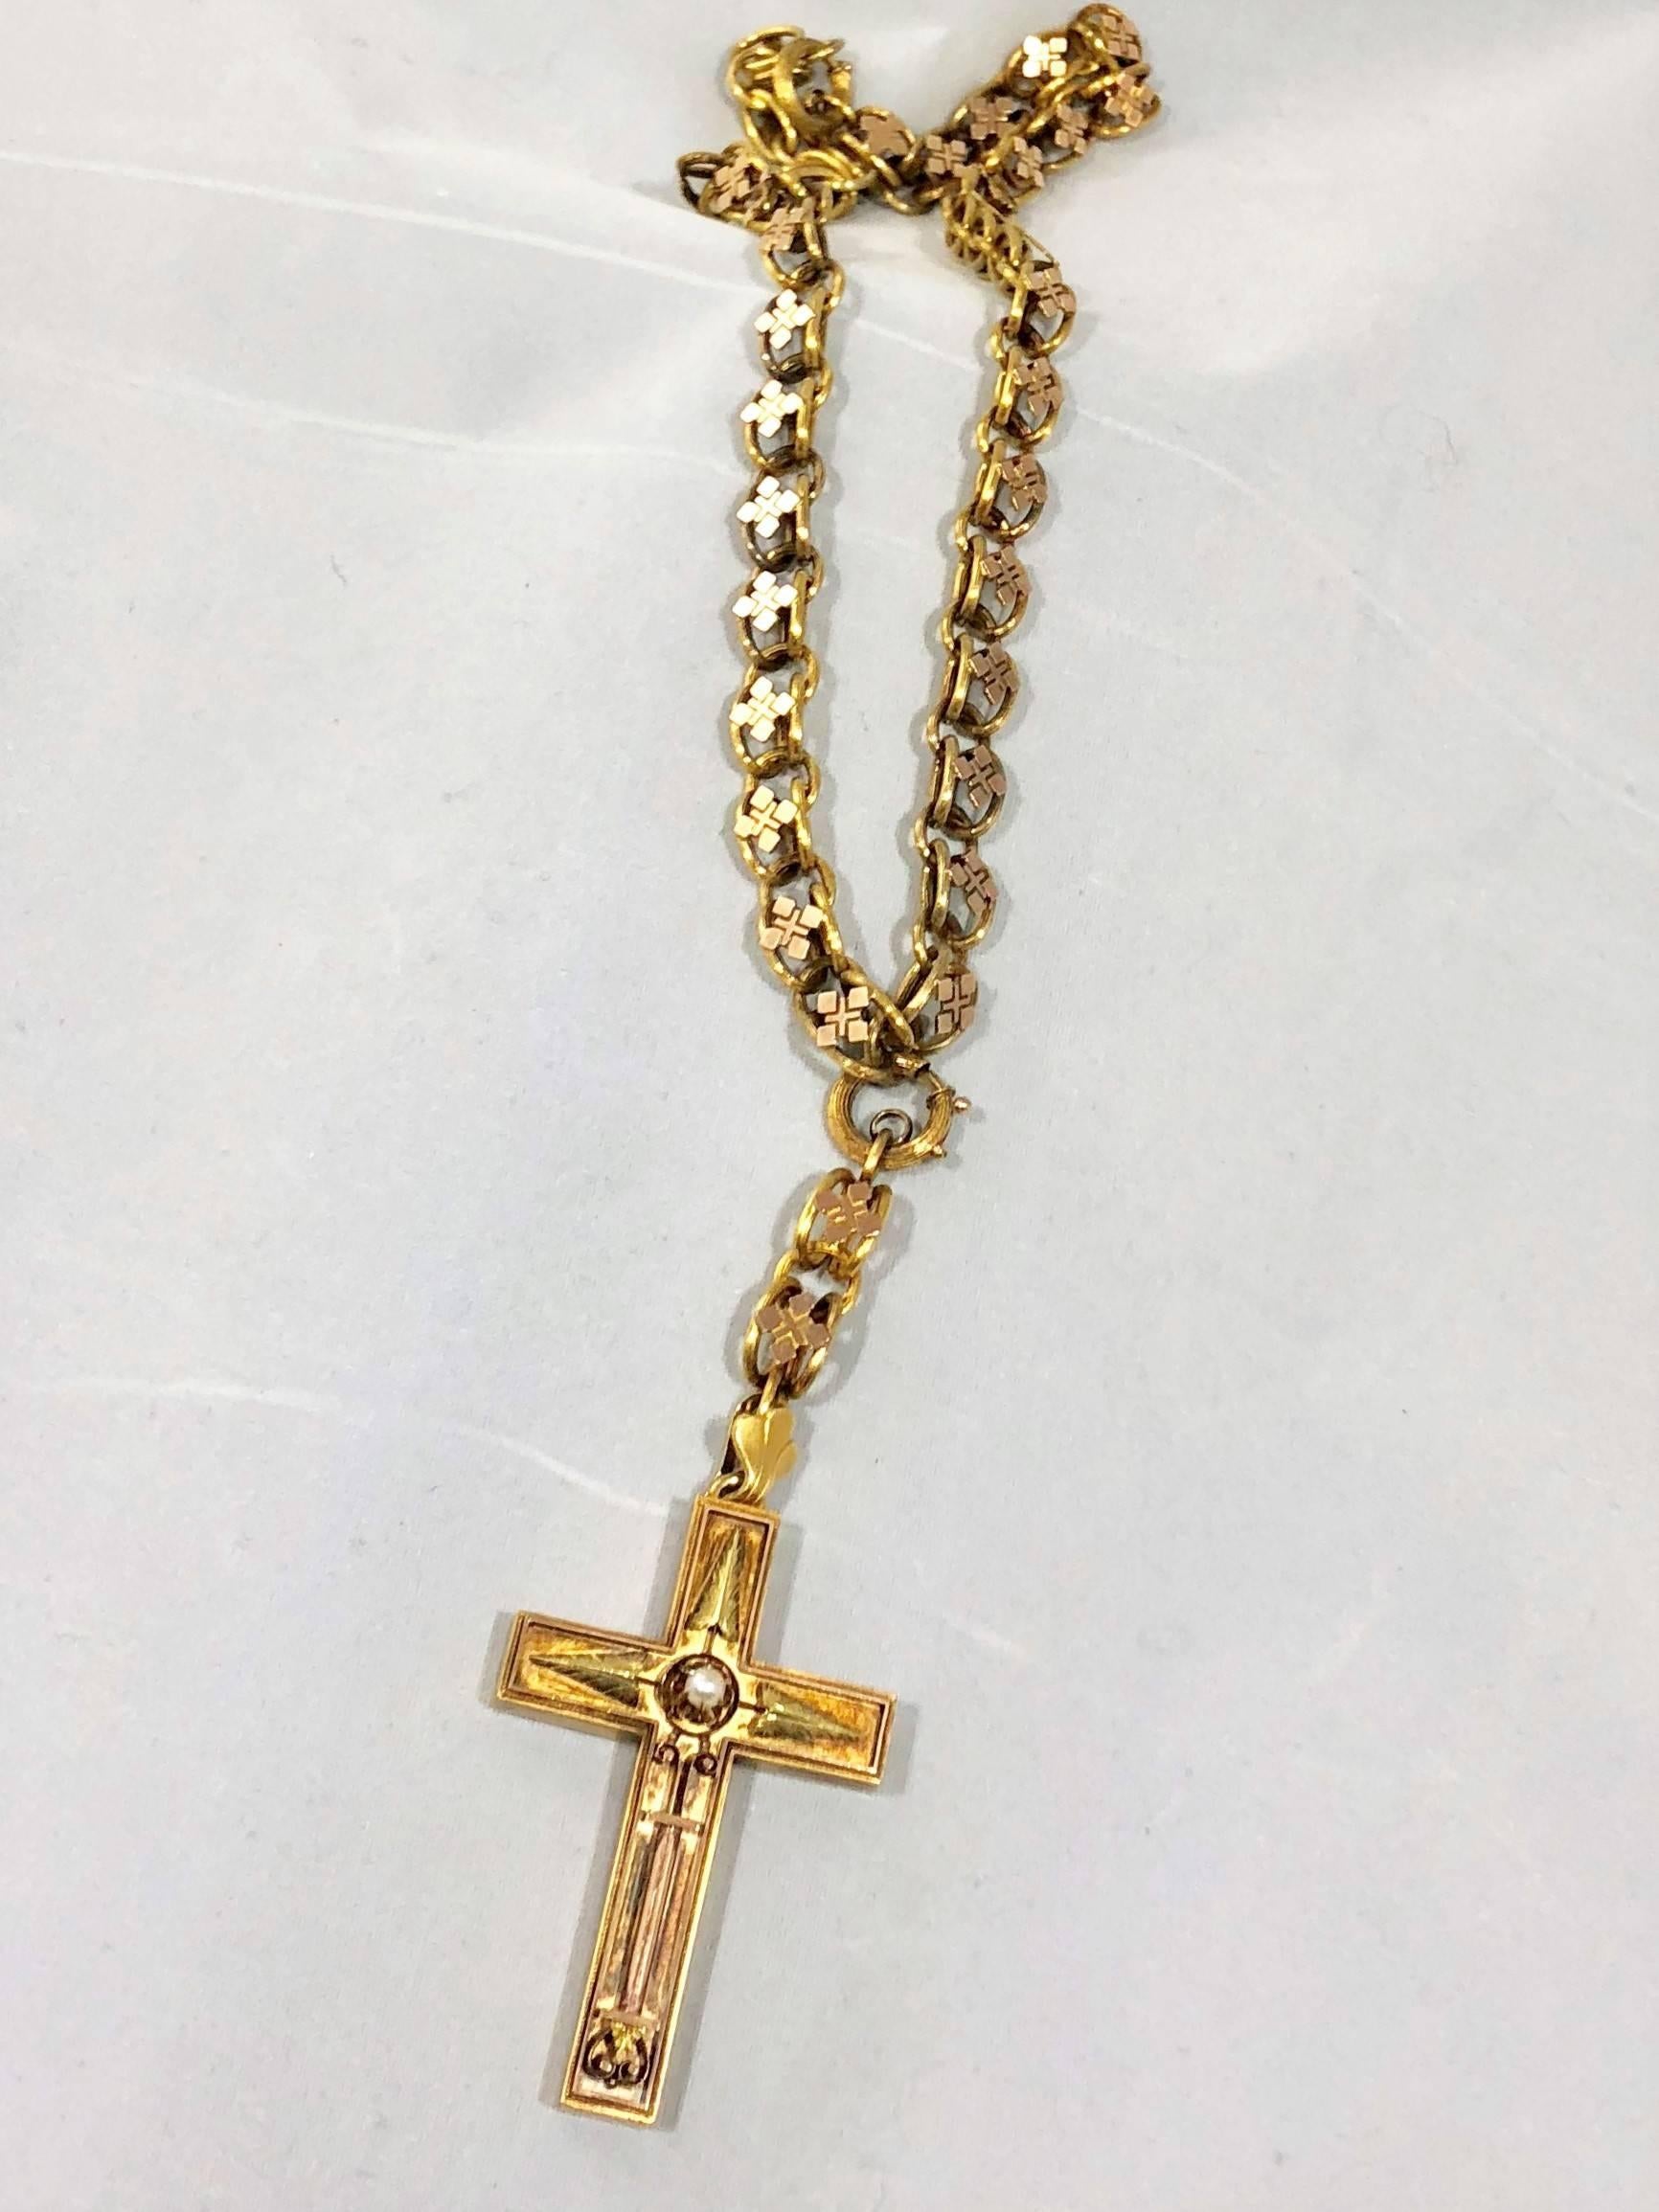 Antique Victorian 15 karat book chain and cross with seed pearl pendant necklace. This Exquisite piece of Art is a true antique, Victorian Circa Approx. 1800-1870. This one of a kind Victorian Book chain and removable cross pendant are handcrafted,